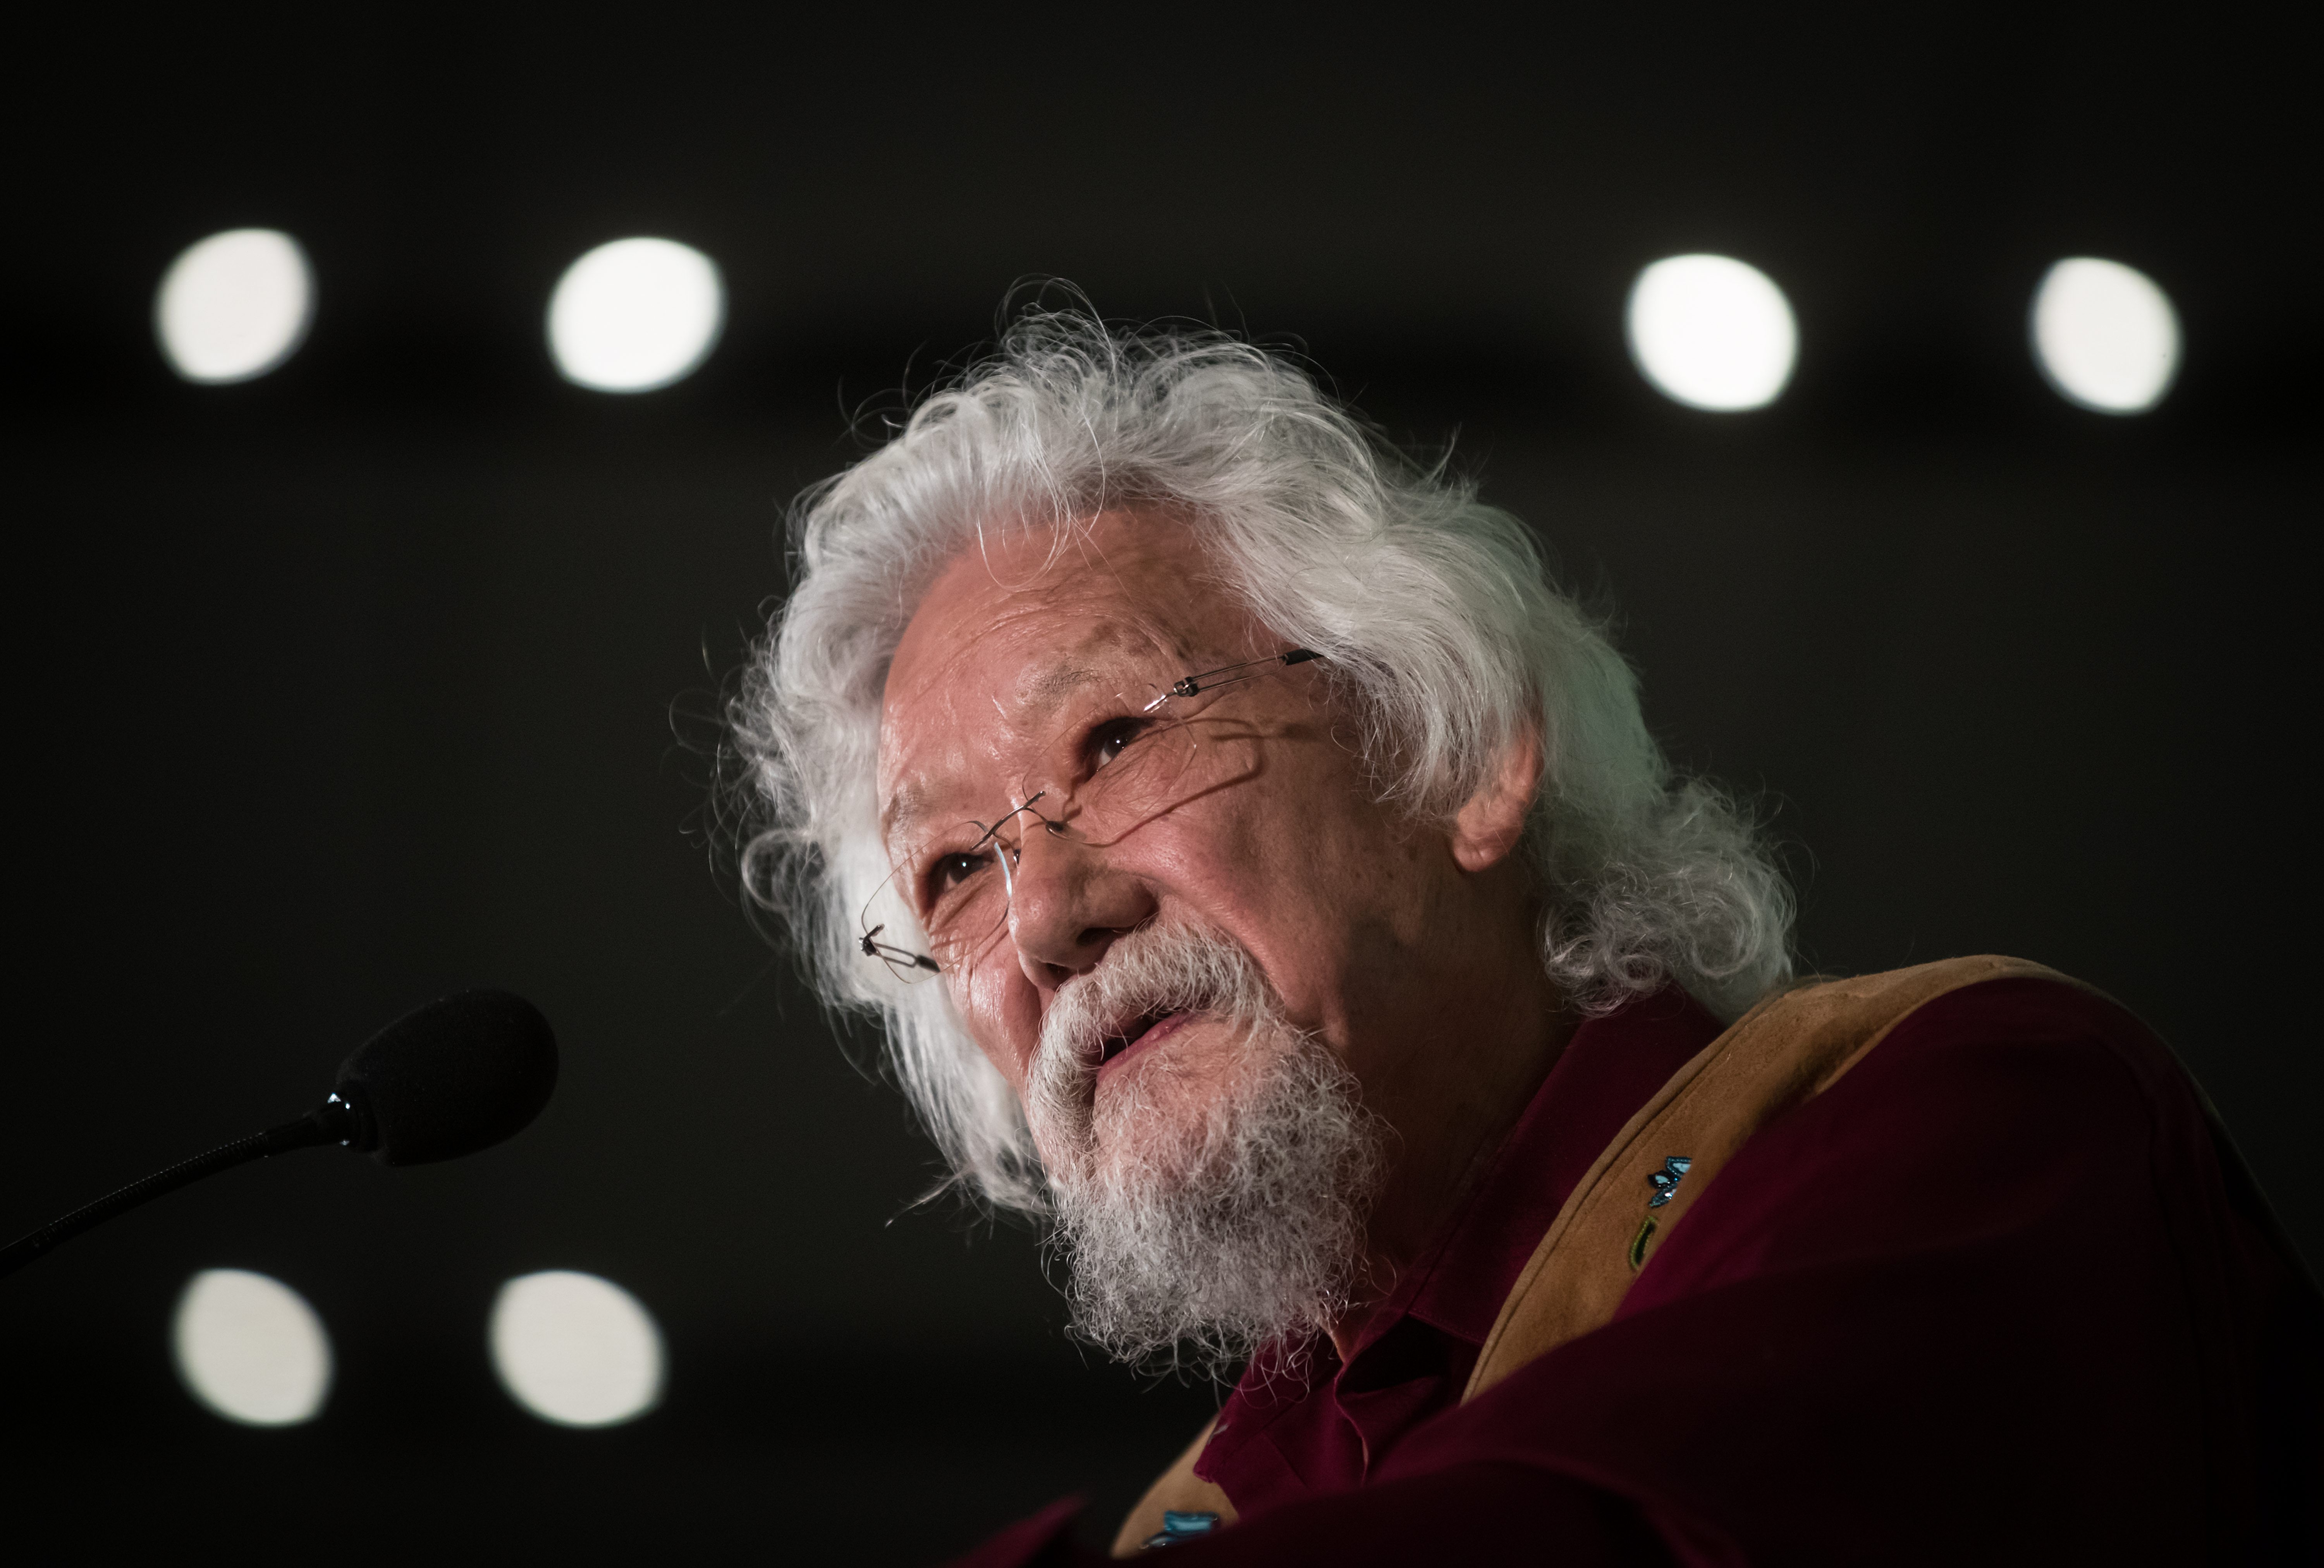 Environmental activist David Suzuki speaks during a rally for Green Party Leader Elizabeth May and party candidates, in Vancouver, Saturday, Oct. 19, 2019. THE CANADIAN PRESS/Darryl Dyck